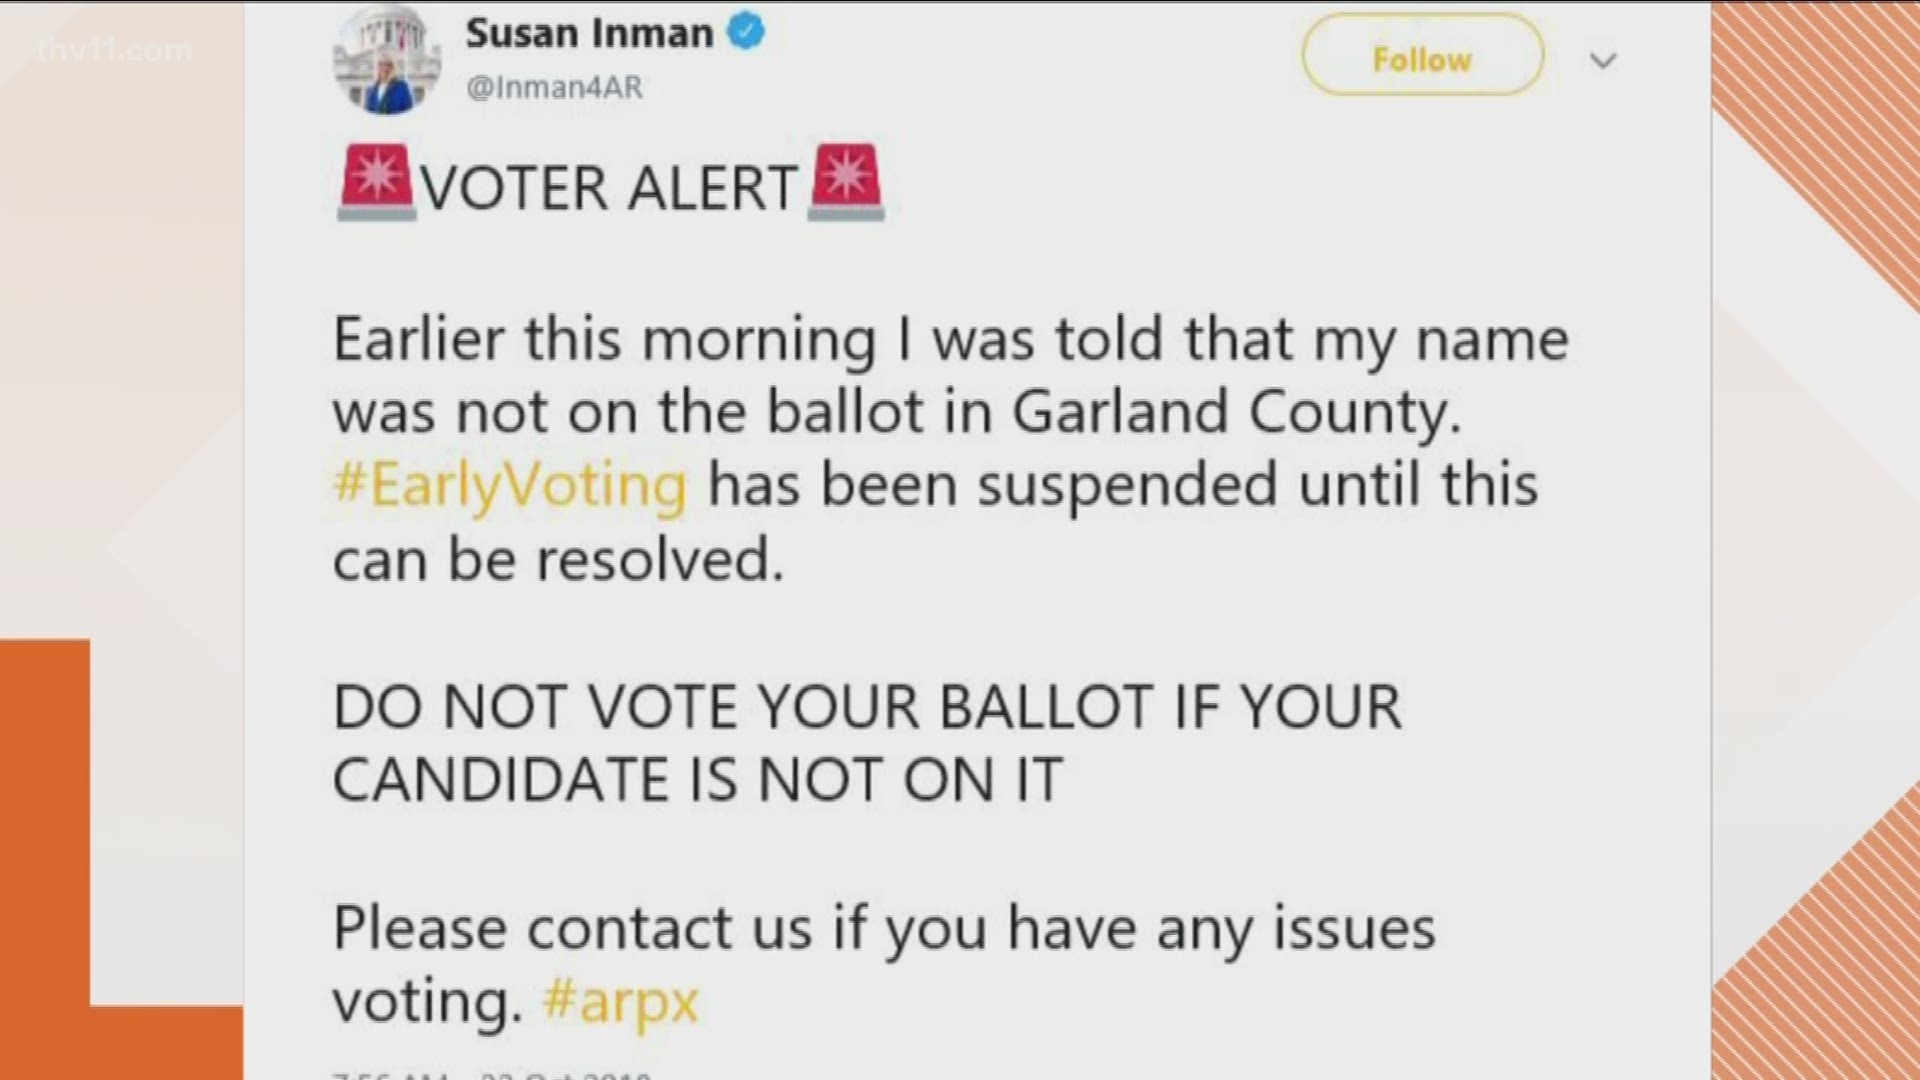 Early voting has since resumed but was temporarily shut down because democratic secretary of state candidate Susan Inman was left off the ballot.